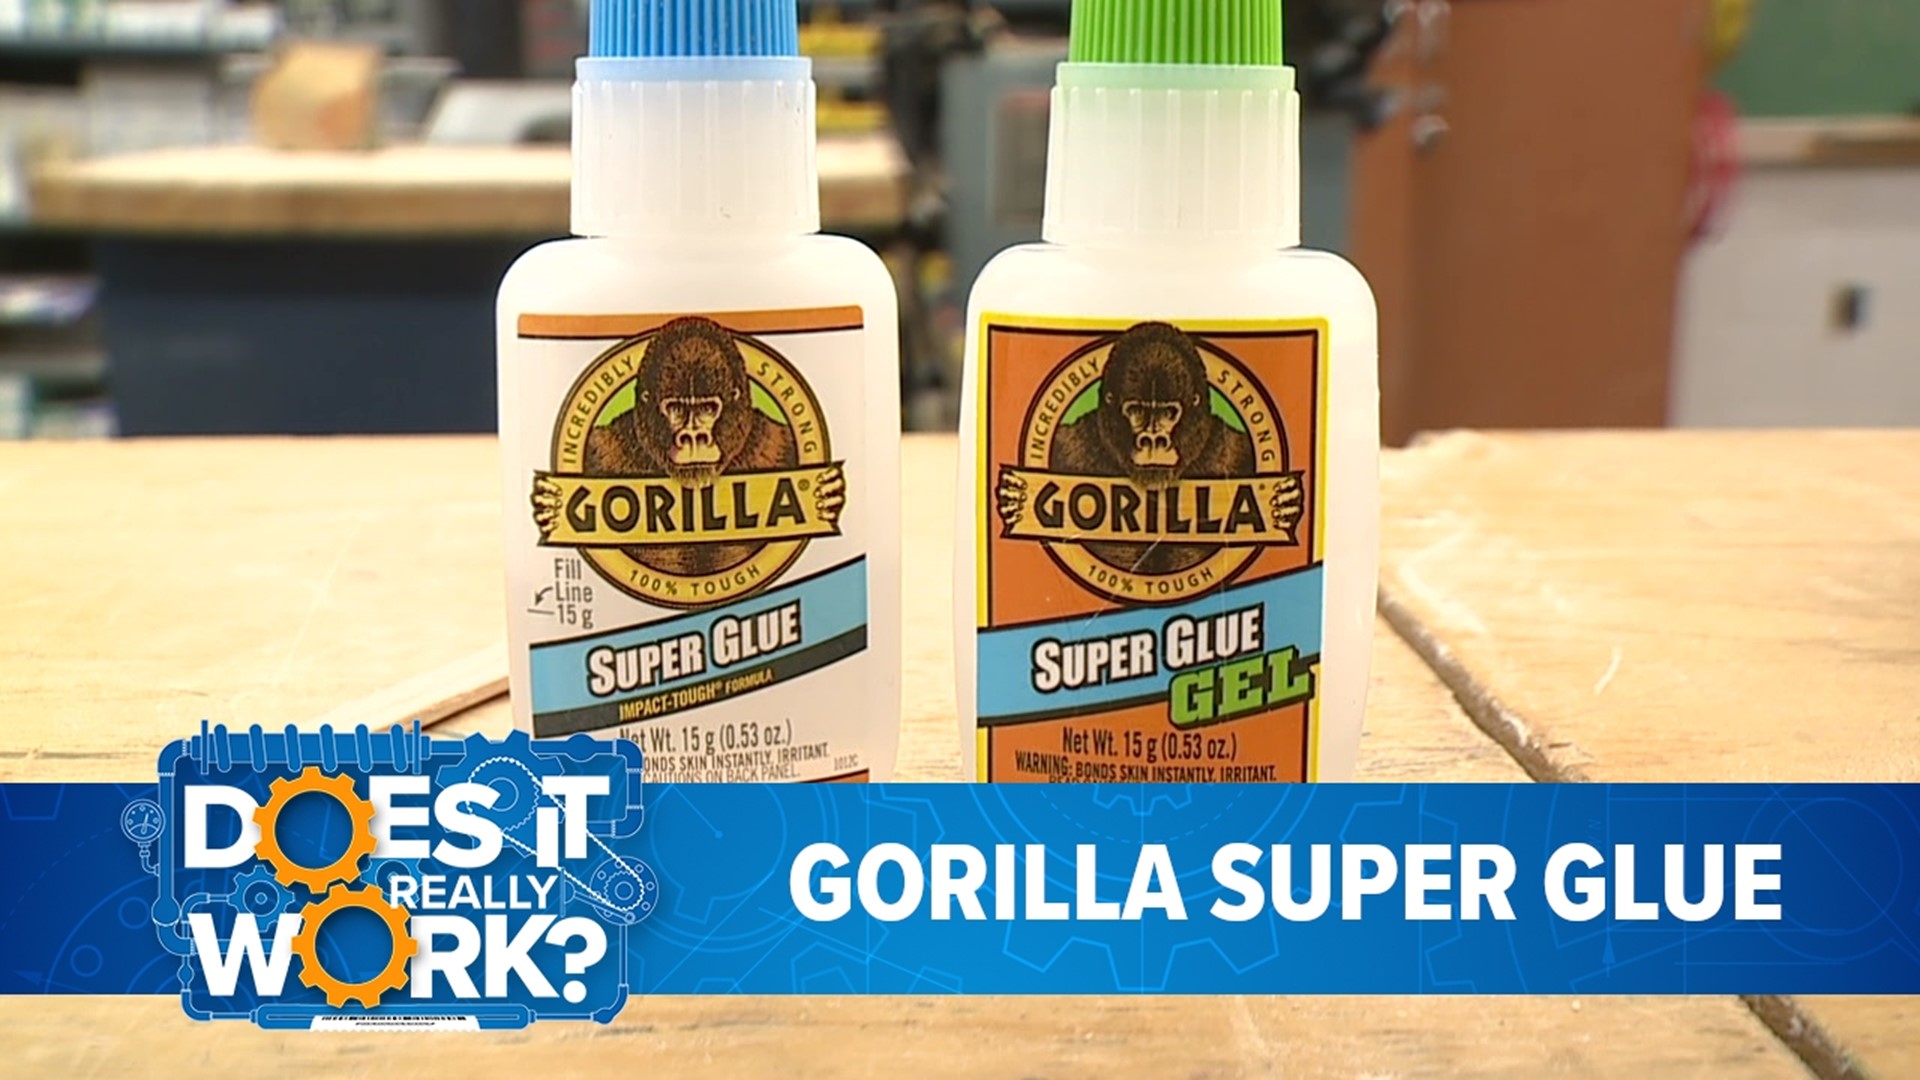 The maker claims its high strength and quick set time make Gorilla Super Glue the go-to for a variety of household projects.